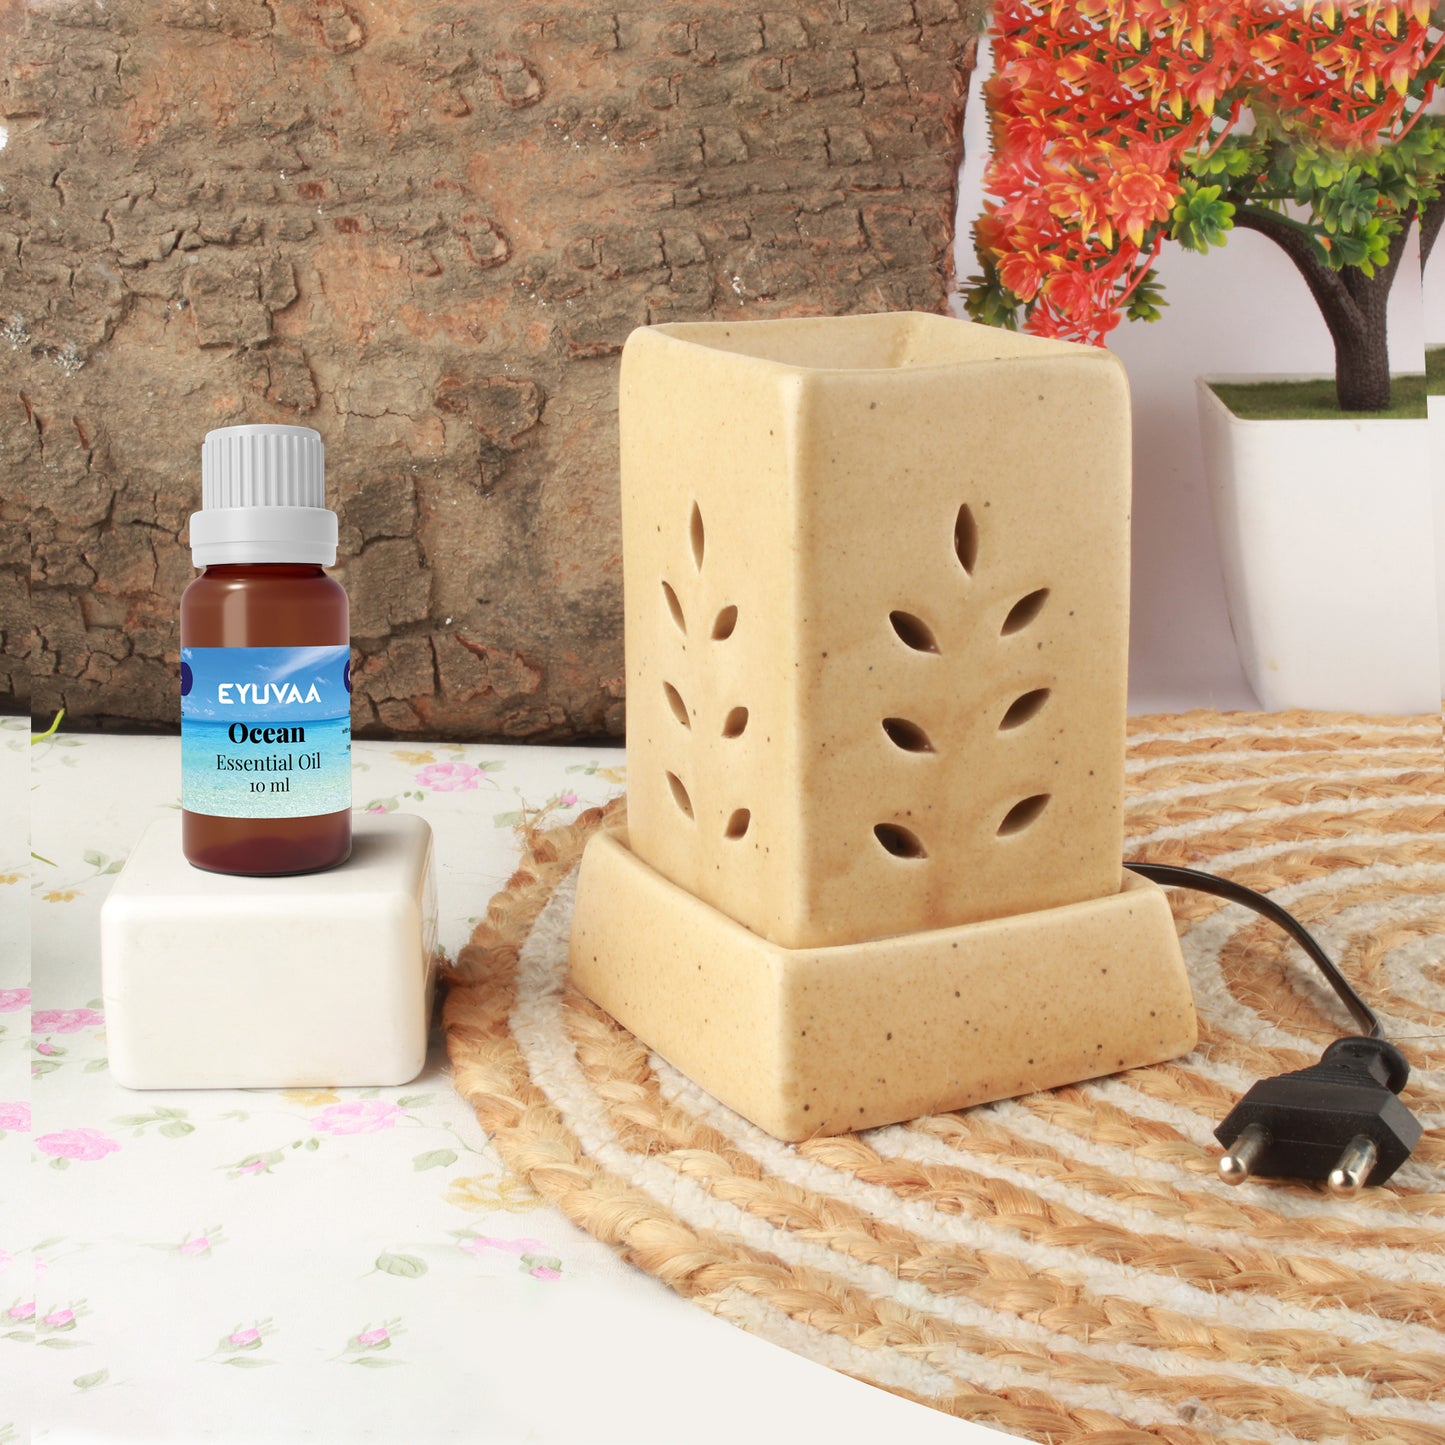 Square Shape Electric Aroma Diffuser, Pillar Diffuser, Aromatherapy Diffuser Set for Home Fragrance, Oil Warmer with 10 ml Fragrance Oil (Brown)